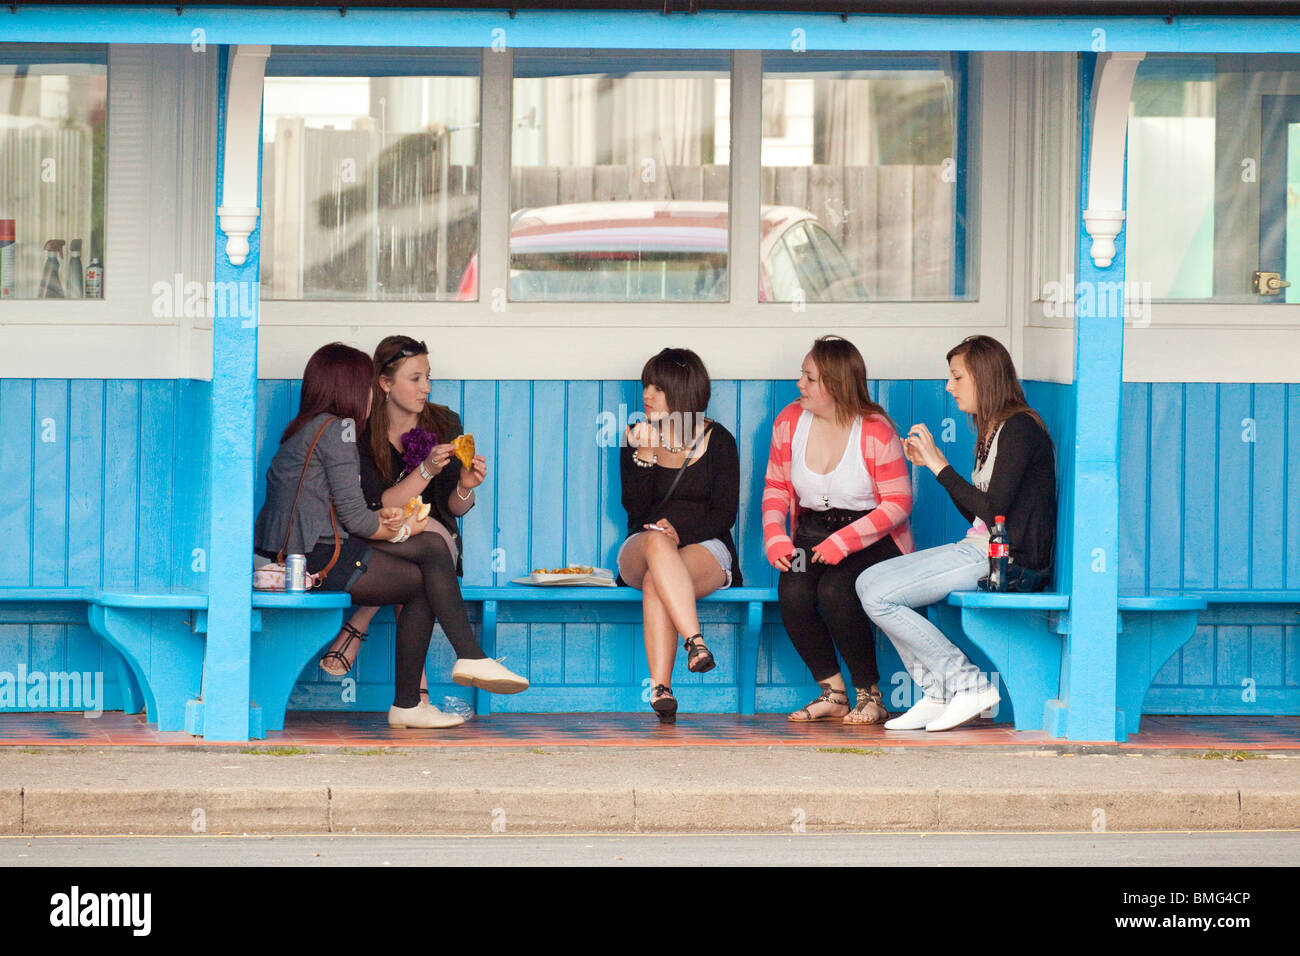 group of young teenage girls in a bus shelter Stock Photo